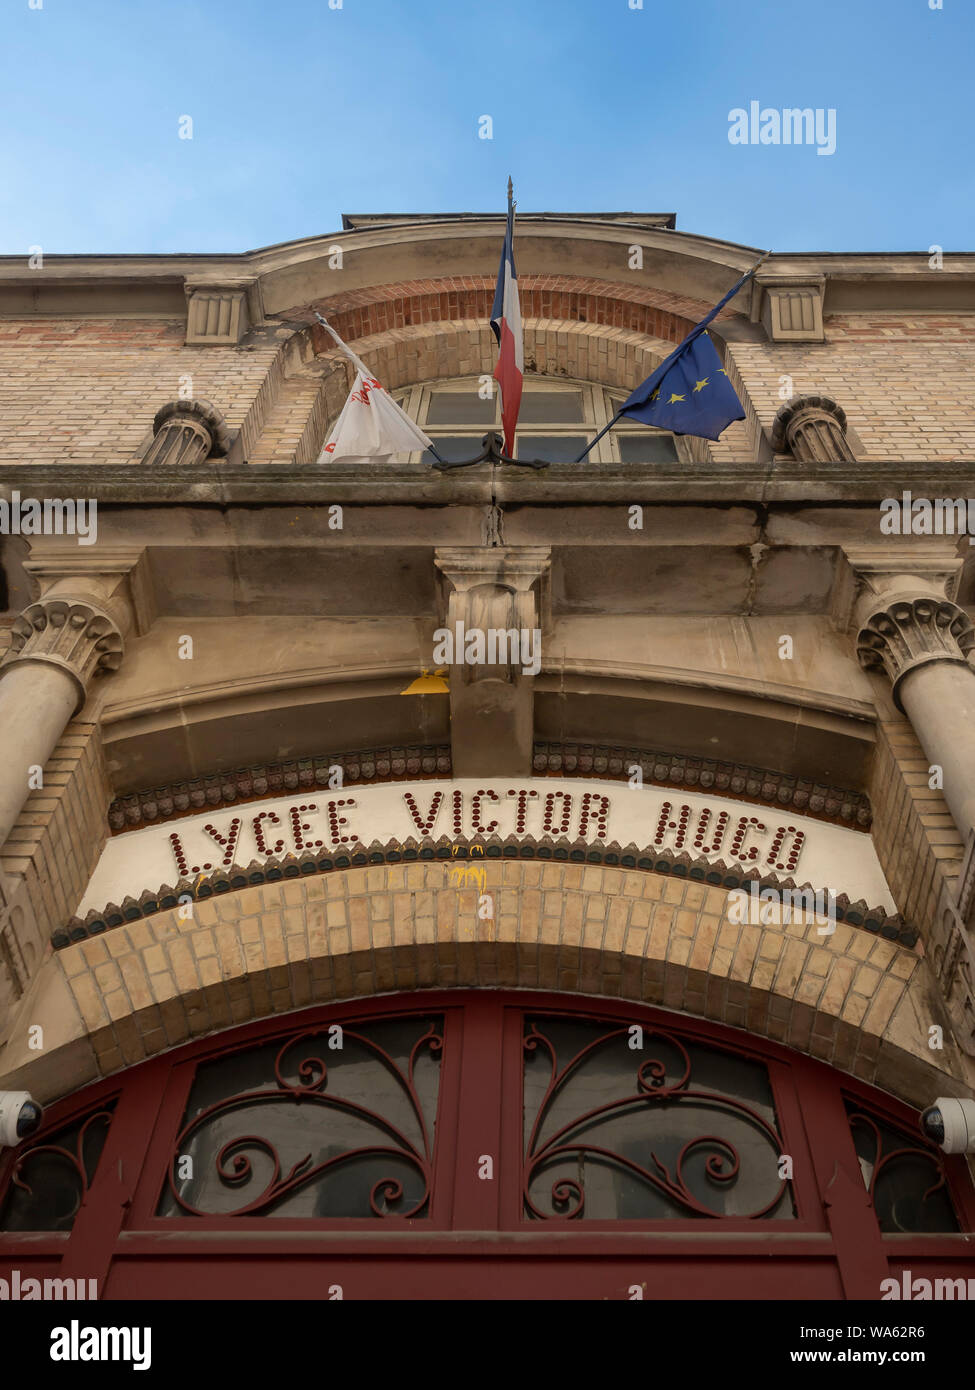 PARIS, FRANCE -AUGUST 02, 2018: Ornate signs over the entrance to Lycee Victor Hugo school in Rue de Sevigne Stock Photo